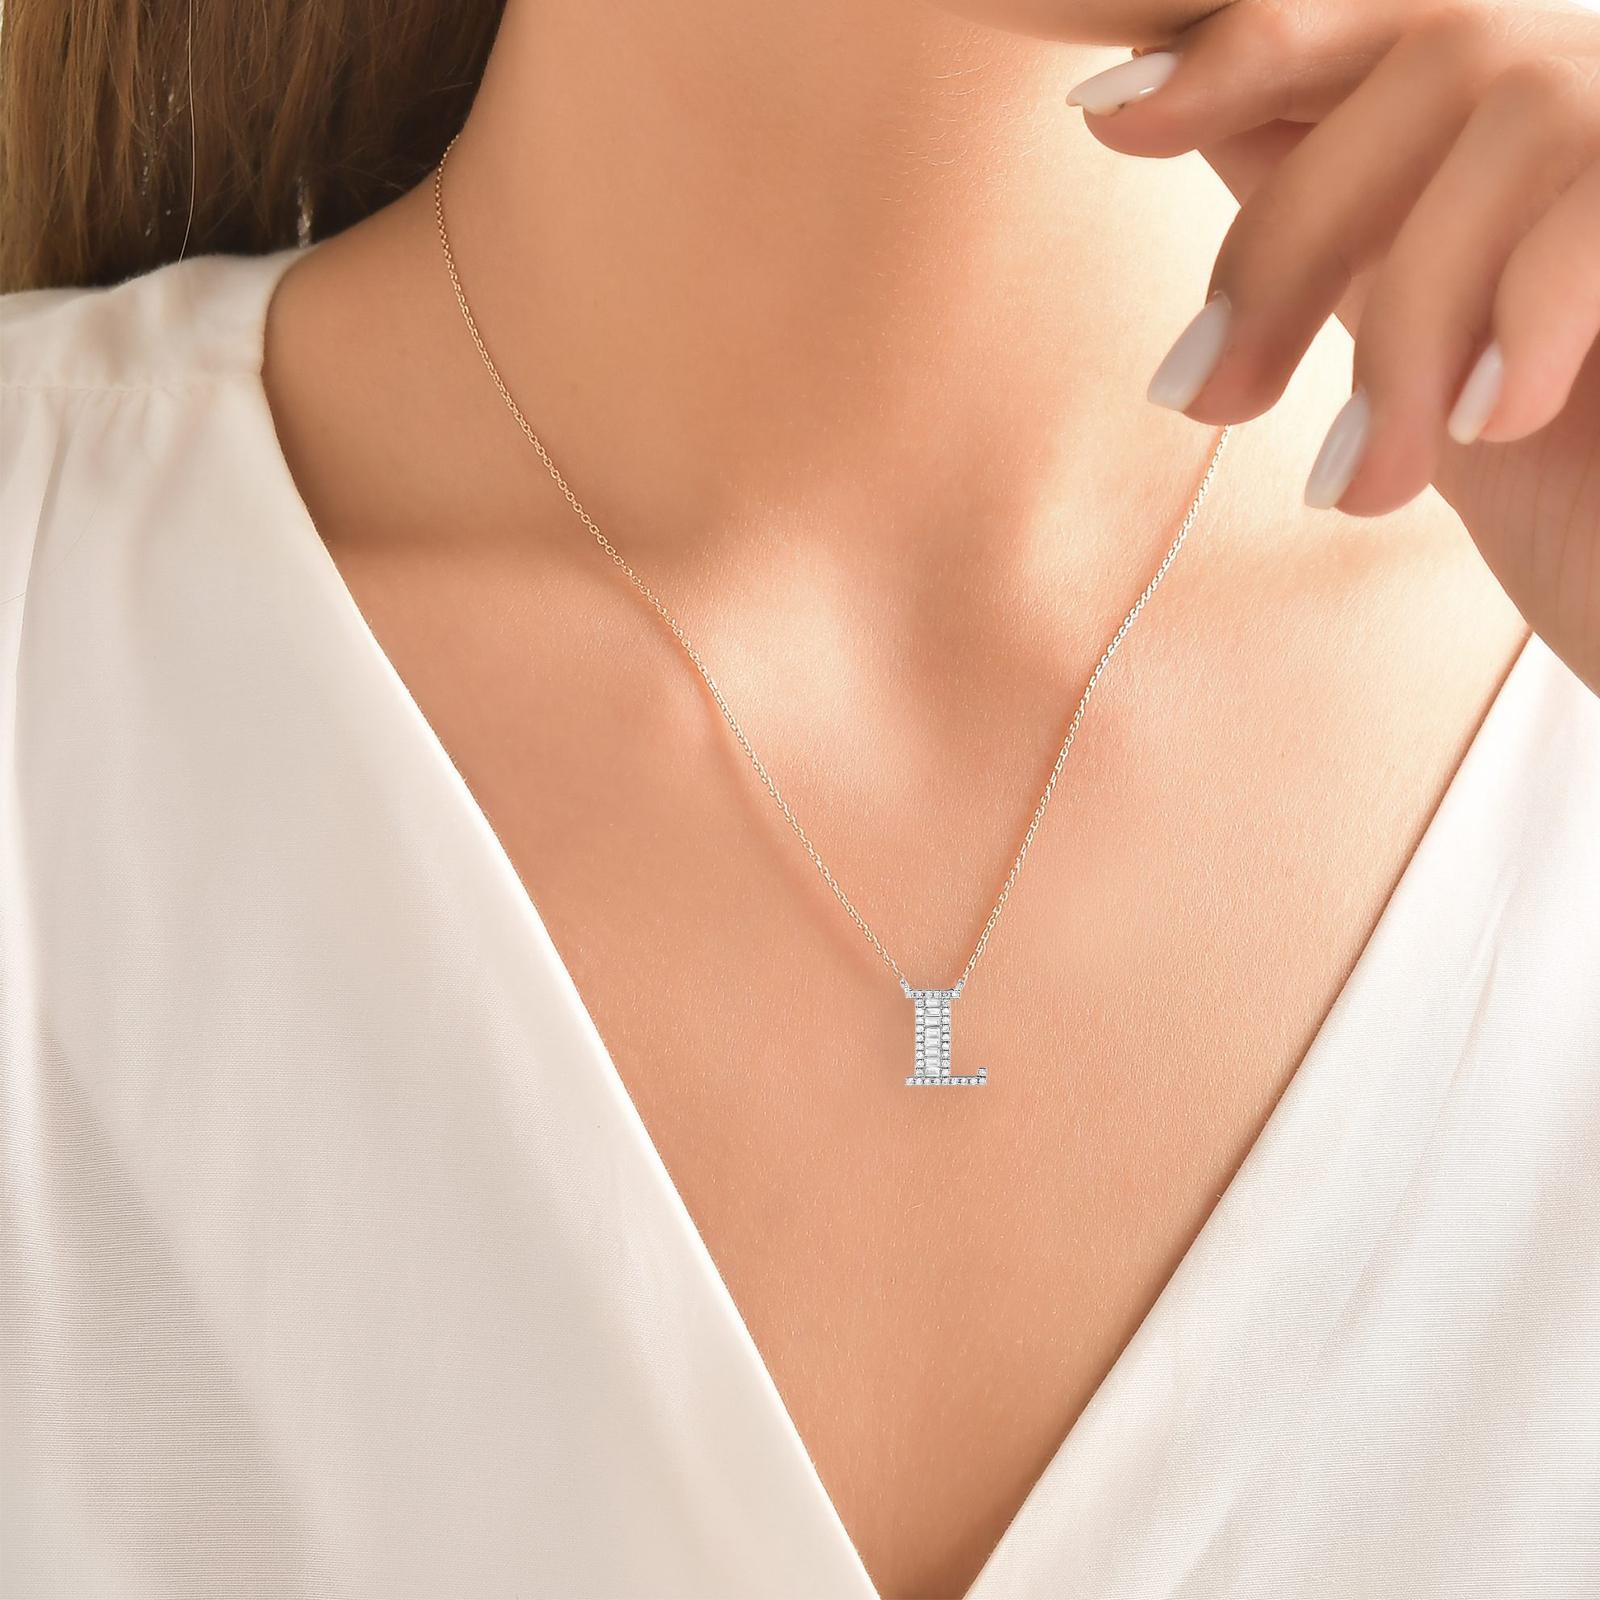 This Beautiful Baguette Diamond Letter Pendant Is Entirely Handcrafted In 14 Karat White Gold. 
The Letter L Pendant Is Garlanded With Channel-Set Baguette-Cut Diamonds And Prong Set Brilliant Round Diamonds Weighing 0.40 Carats. All Of The Stones